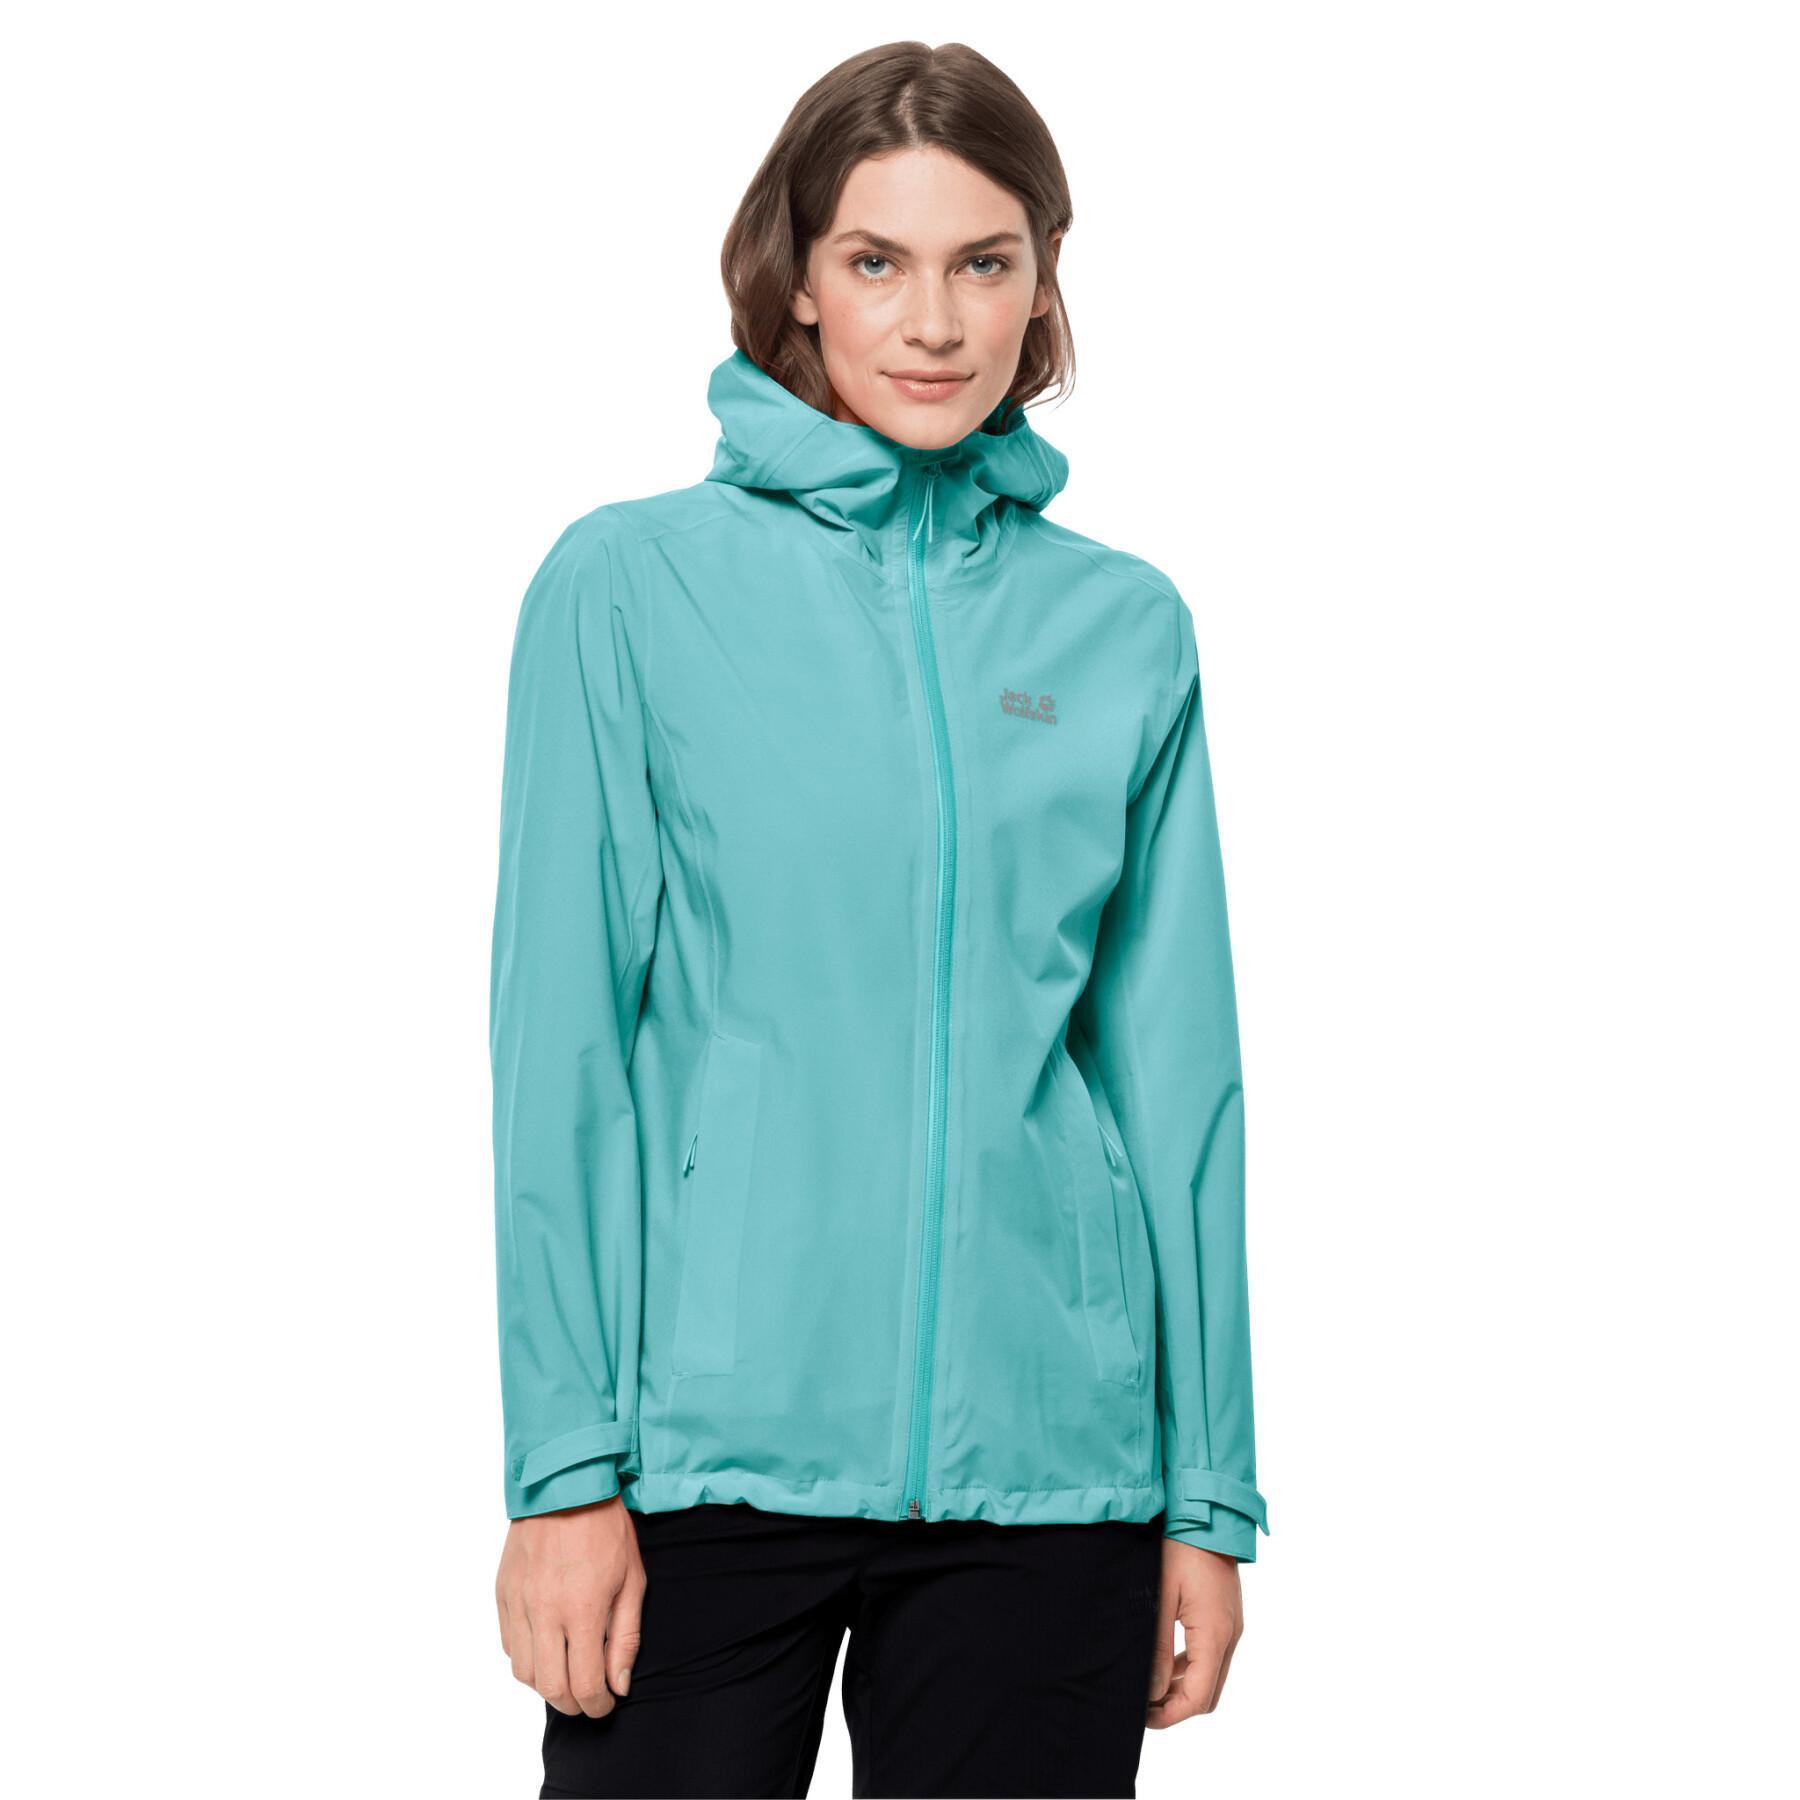 Chaqueta impermeable para mujer Jack Wolfskin Pack & Go